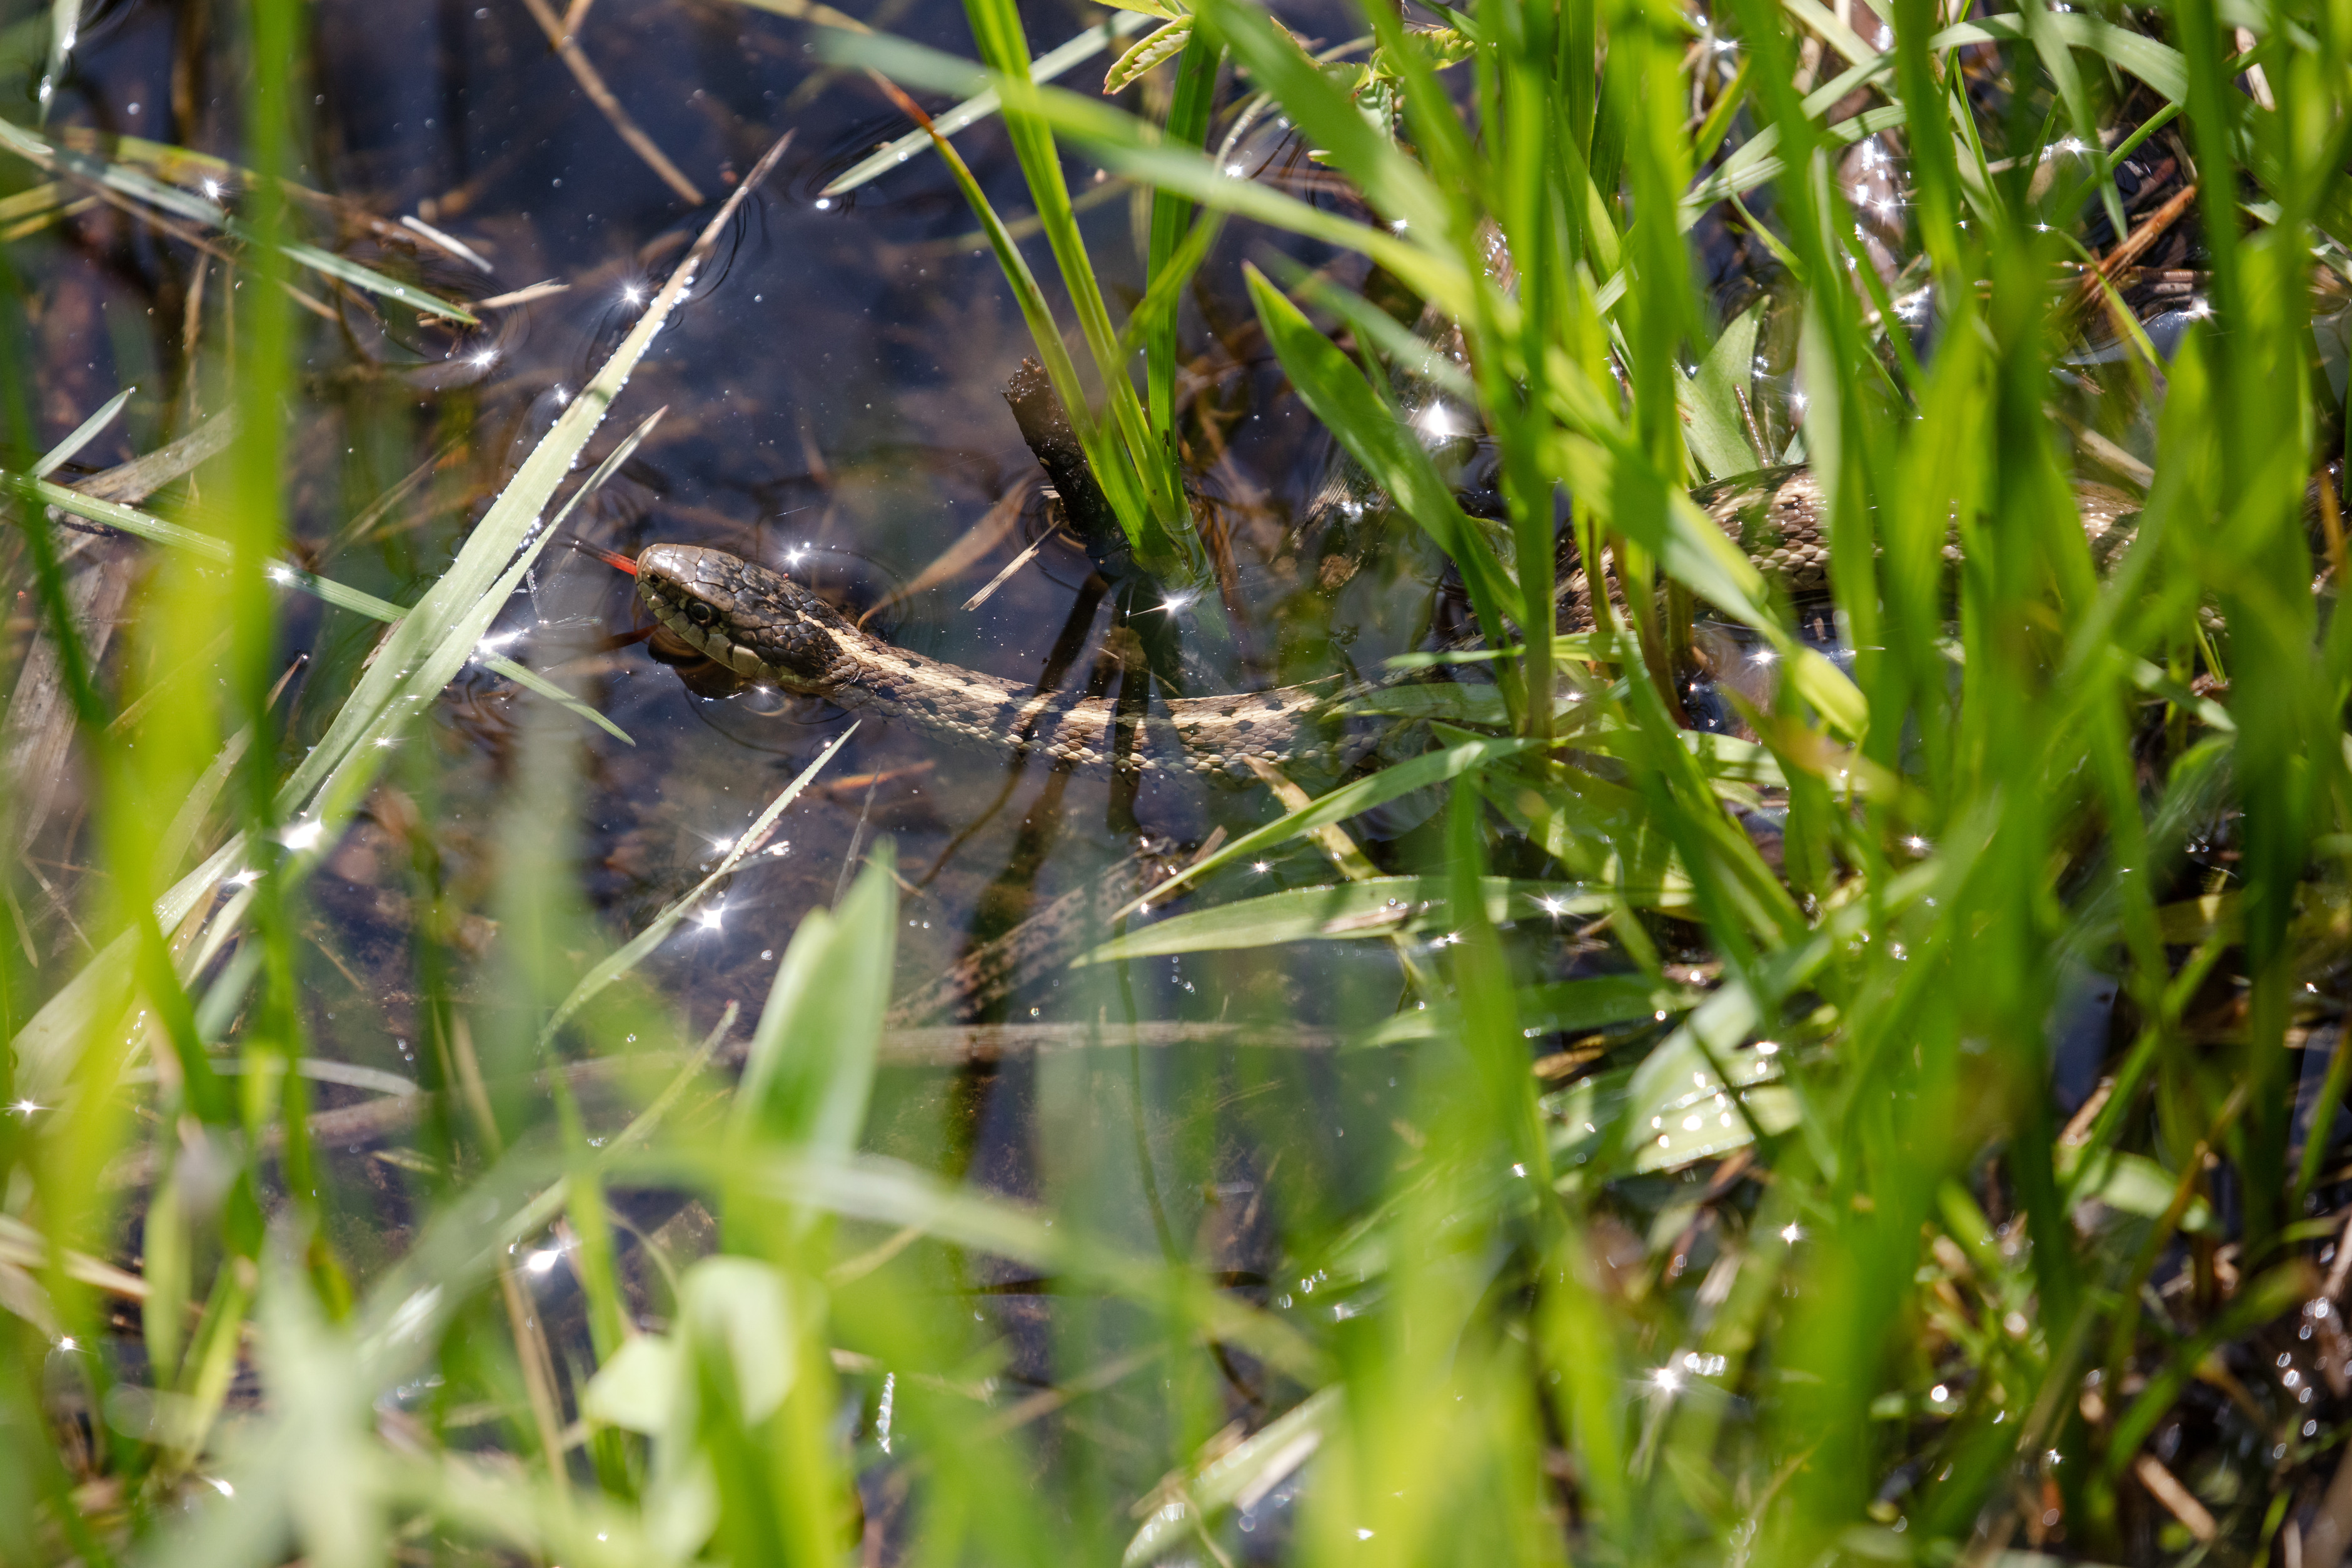 A snake moves in water through high grasses